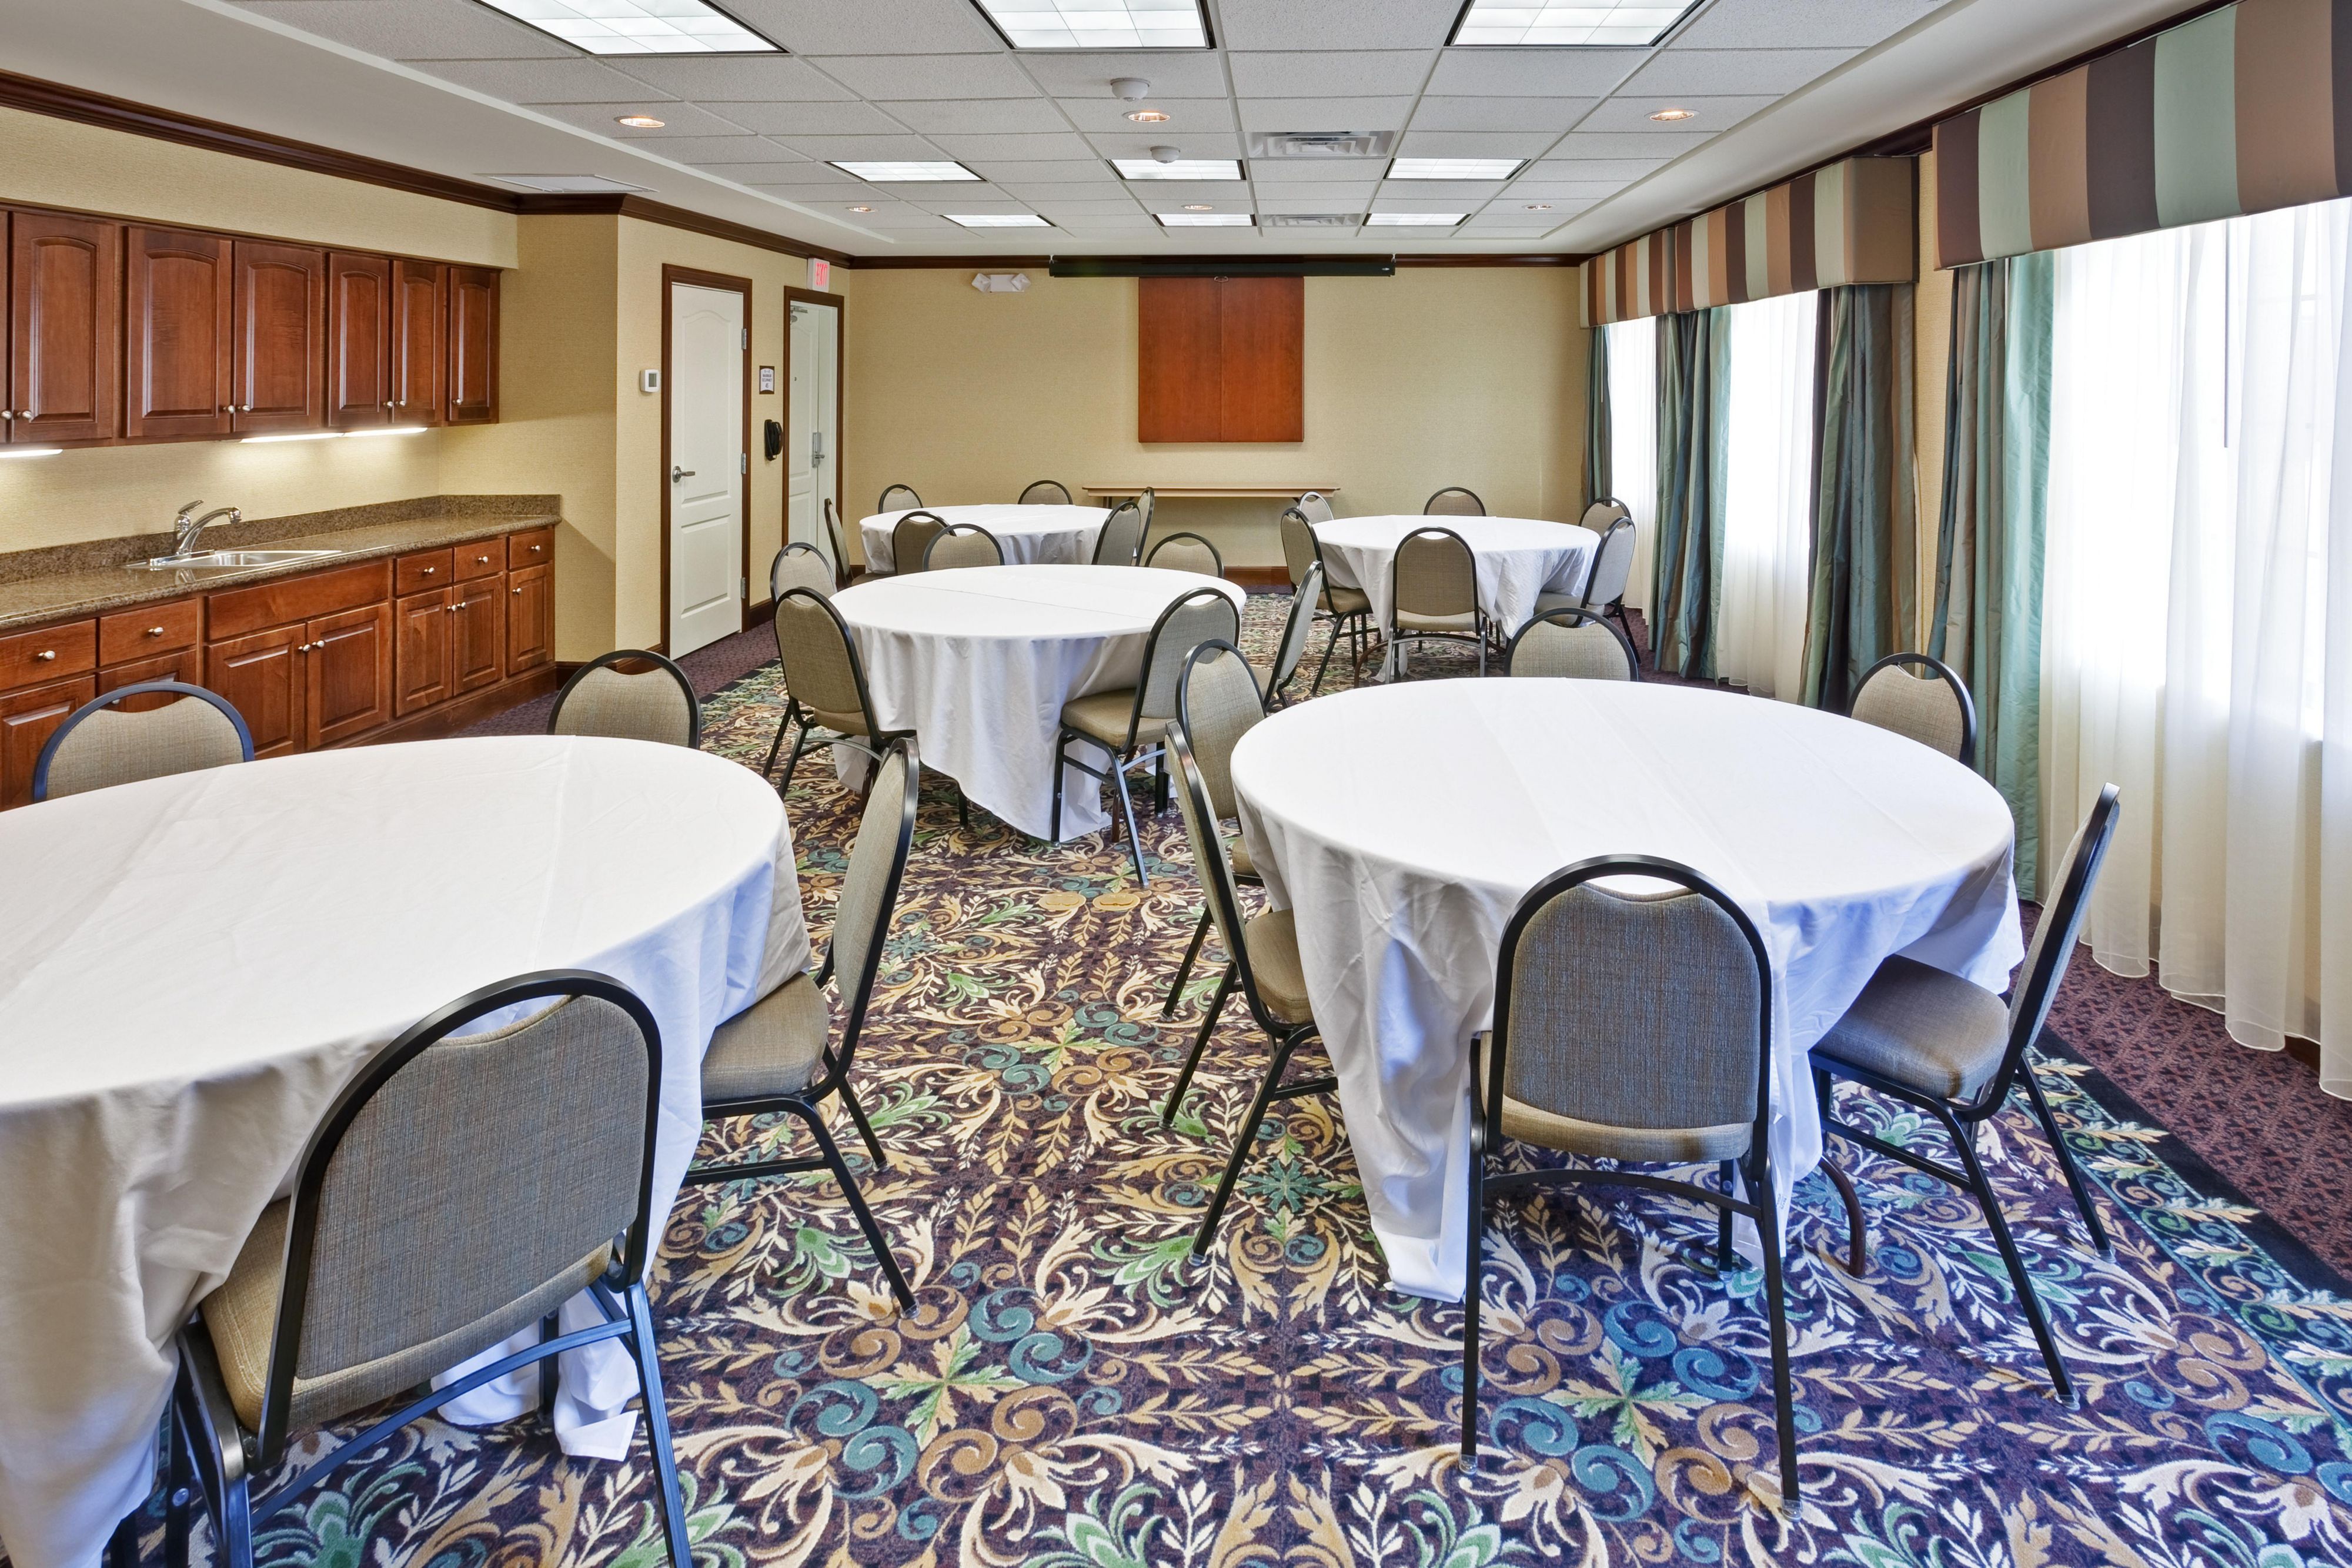 Our meeting room is the perfect space for your next meeting. With a board room style set-up, you can comfortably fit 10 of your colleagues for a training class or company meeting.